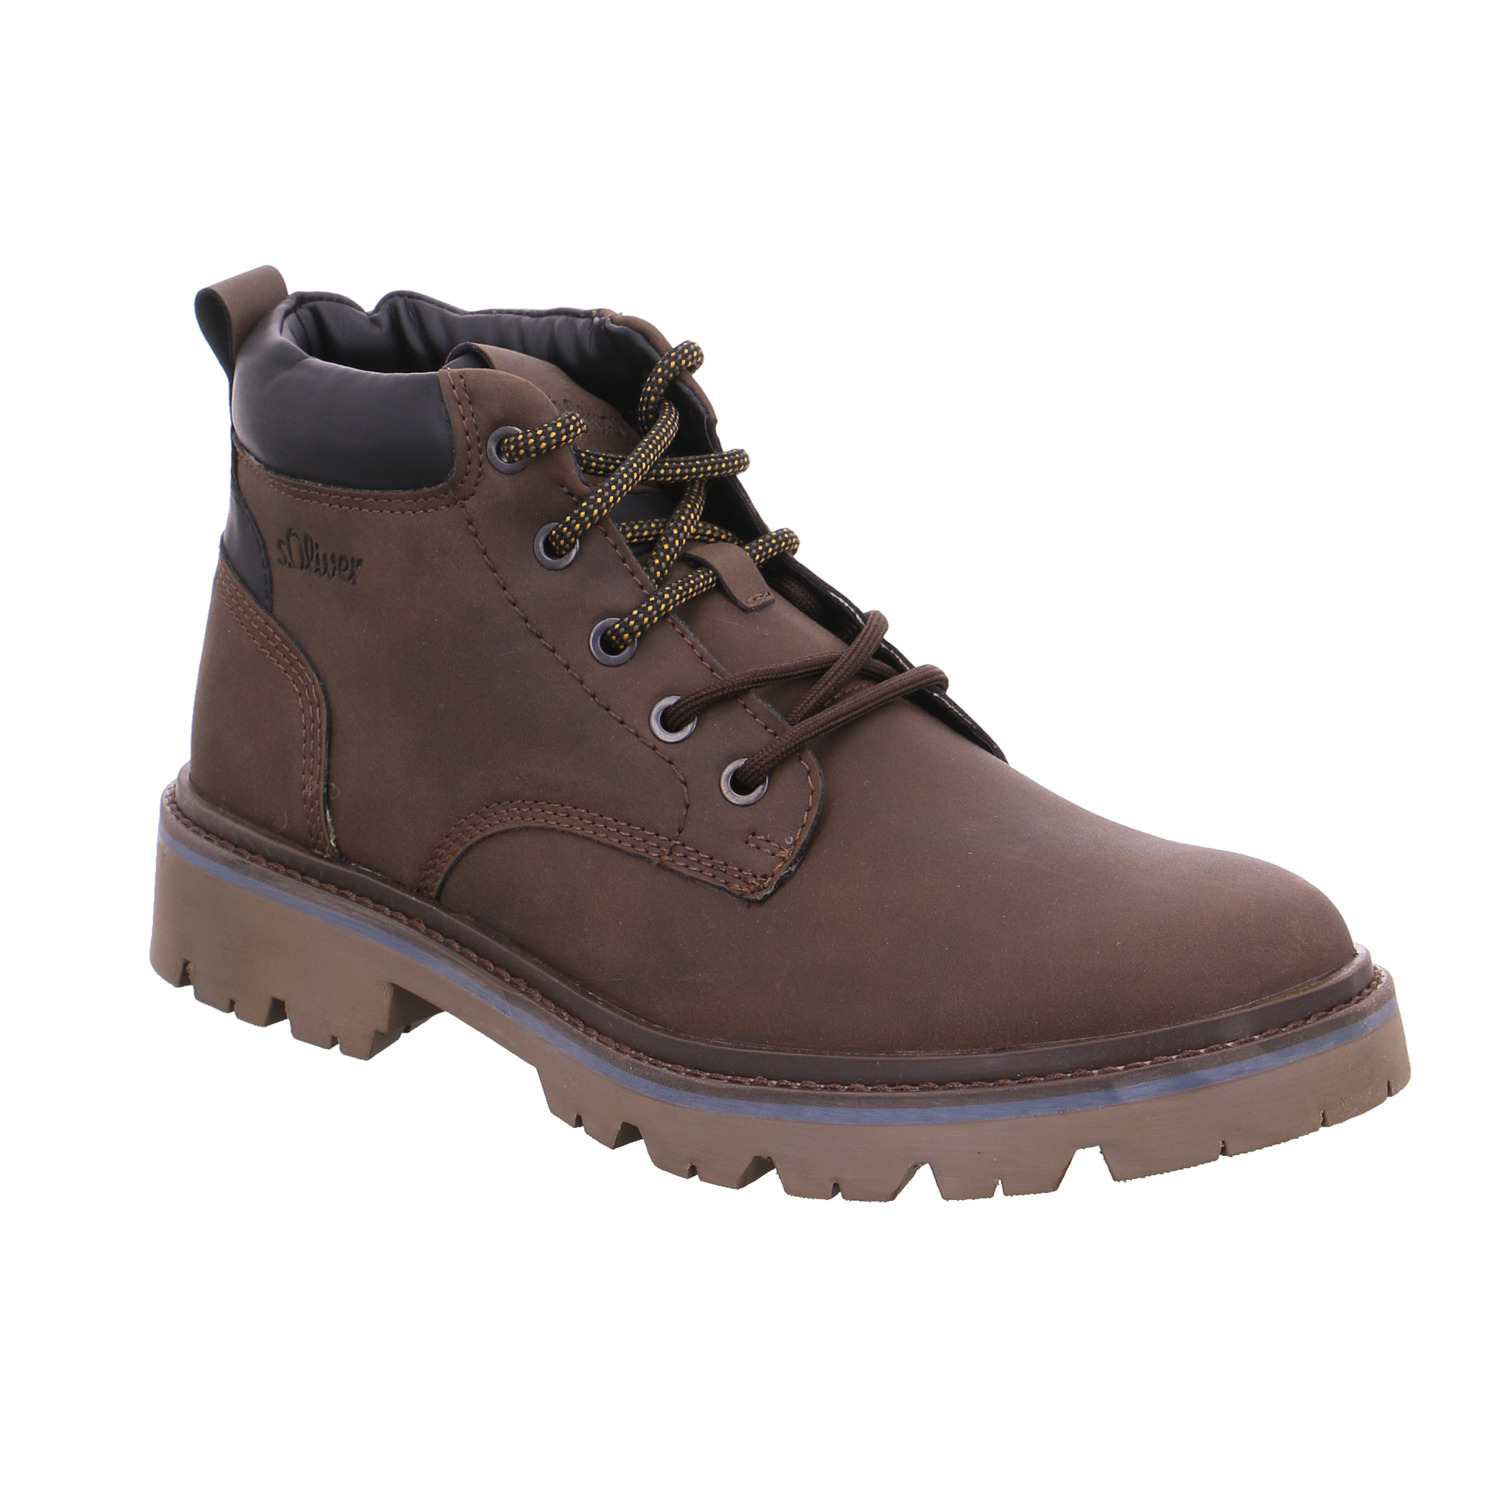 S.OLIVER Winter-Boots Braun Synthetik